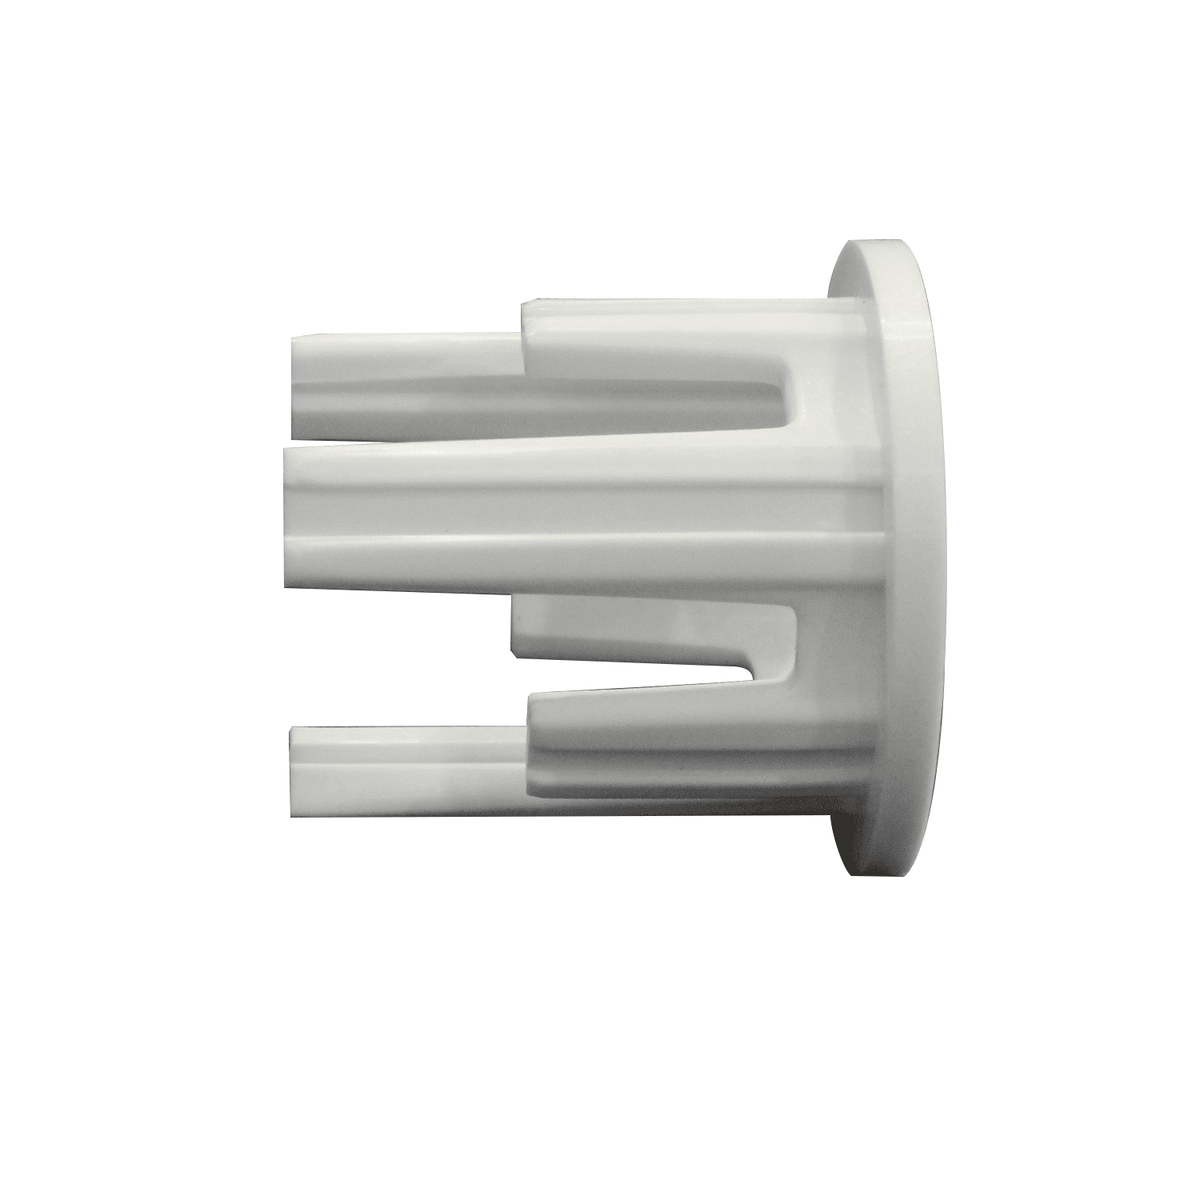 Abgal Pool Cover Connector Plug - Large Size for HRX Reel